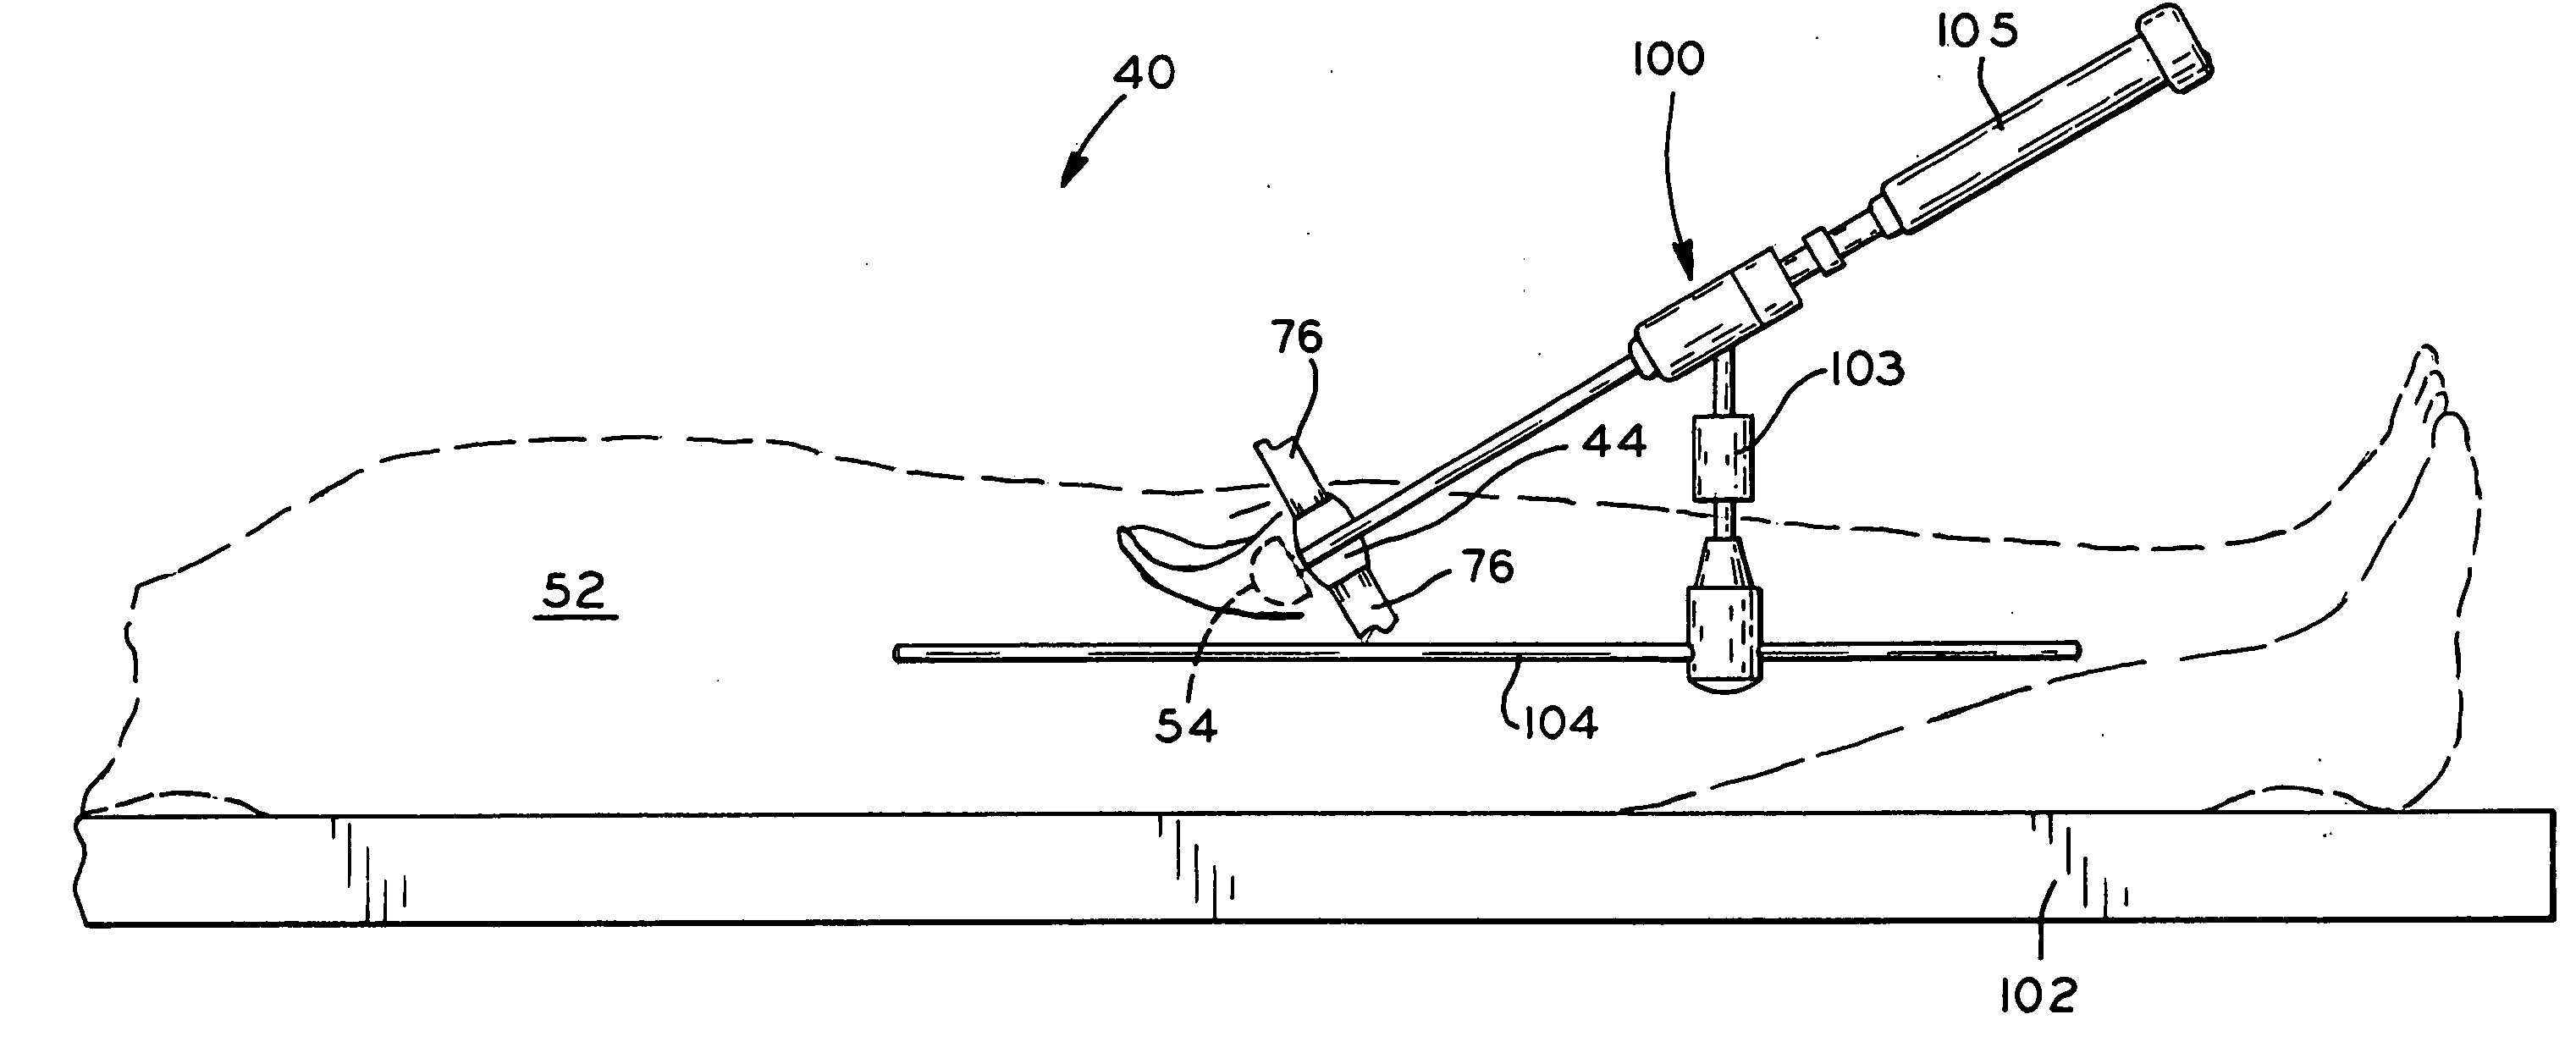 Method and apparatus for performing a minimally invasive total hip arthroplasty